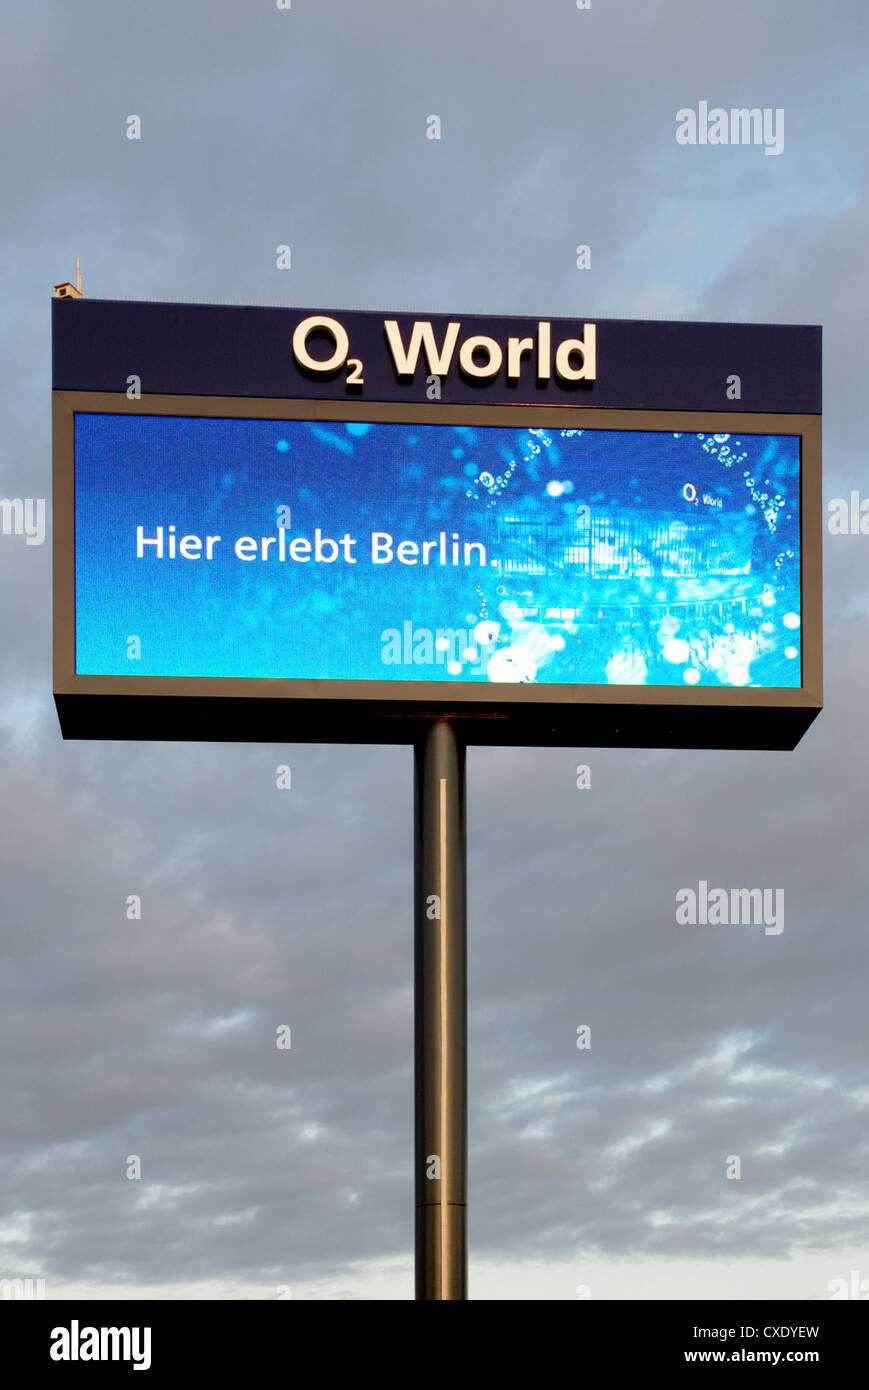 Berlin, site advertising for the company 02 World Stock Photo